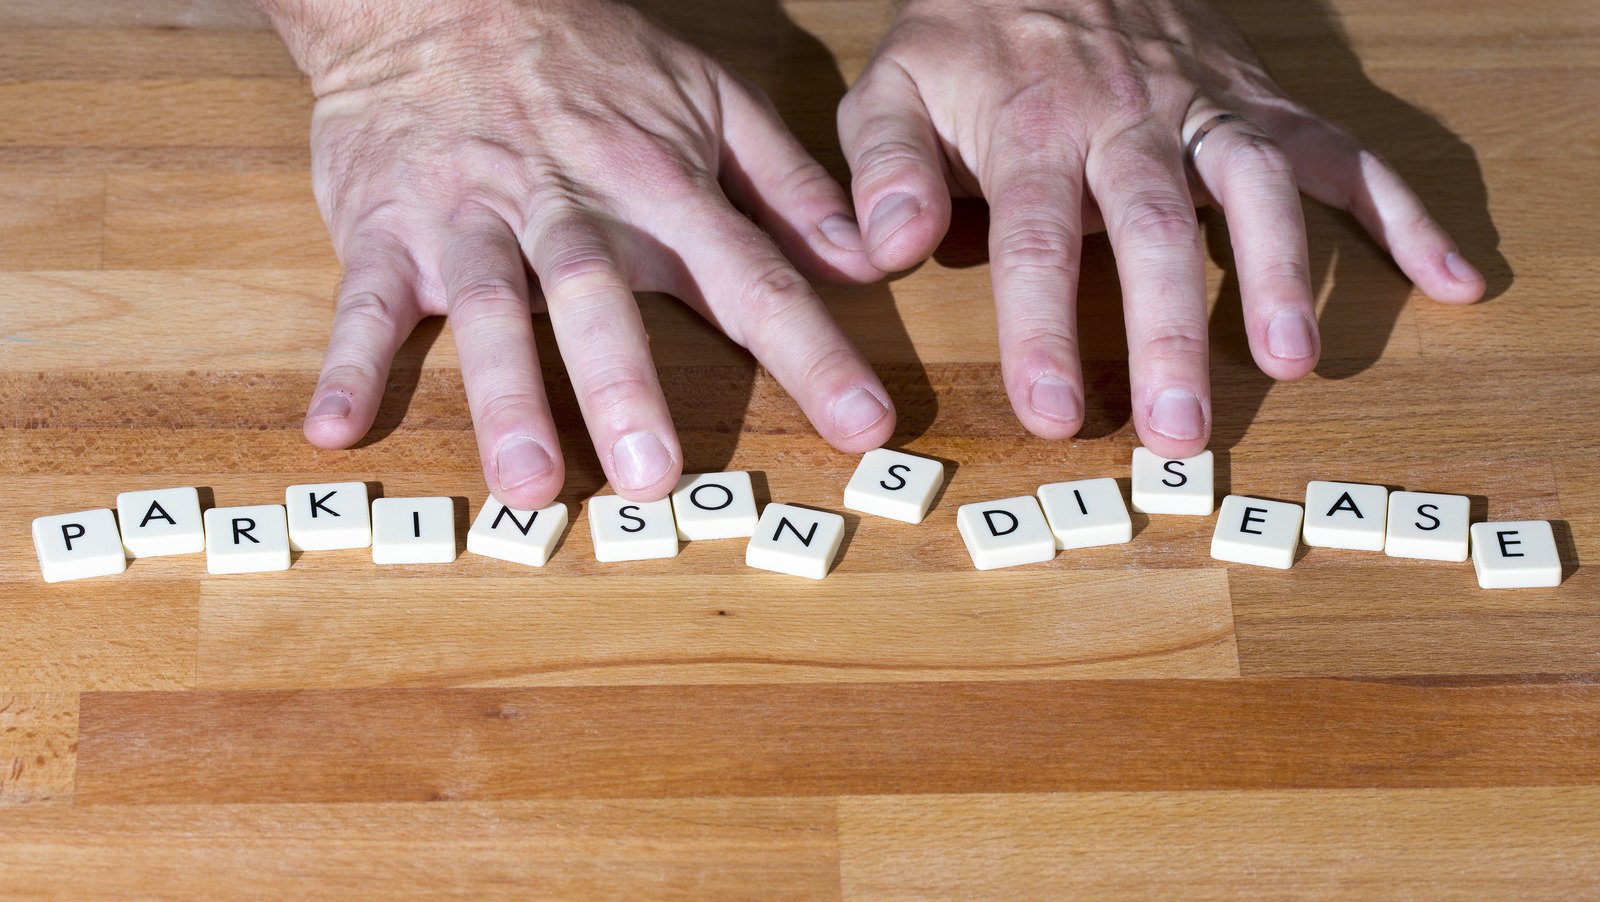 Is There A Cure For Parkinson's Disease? - Health Digest